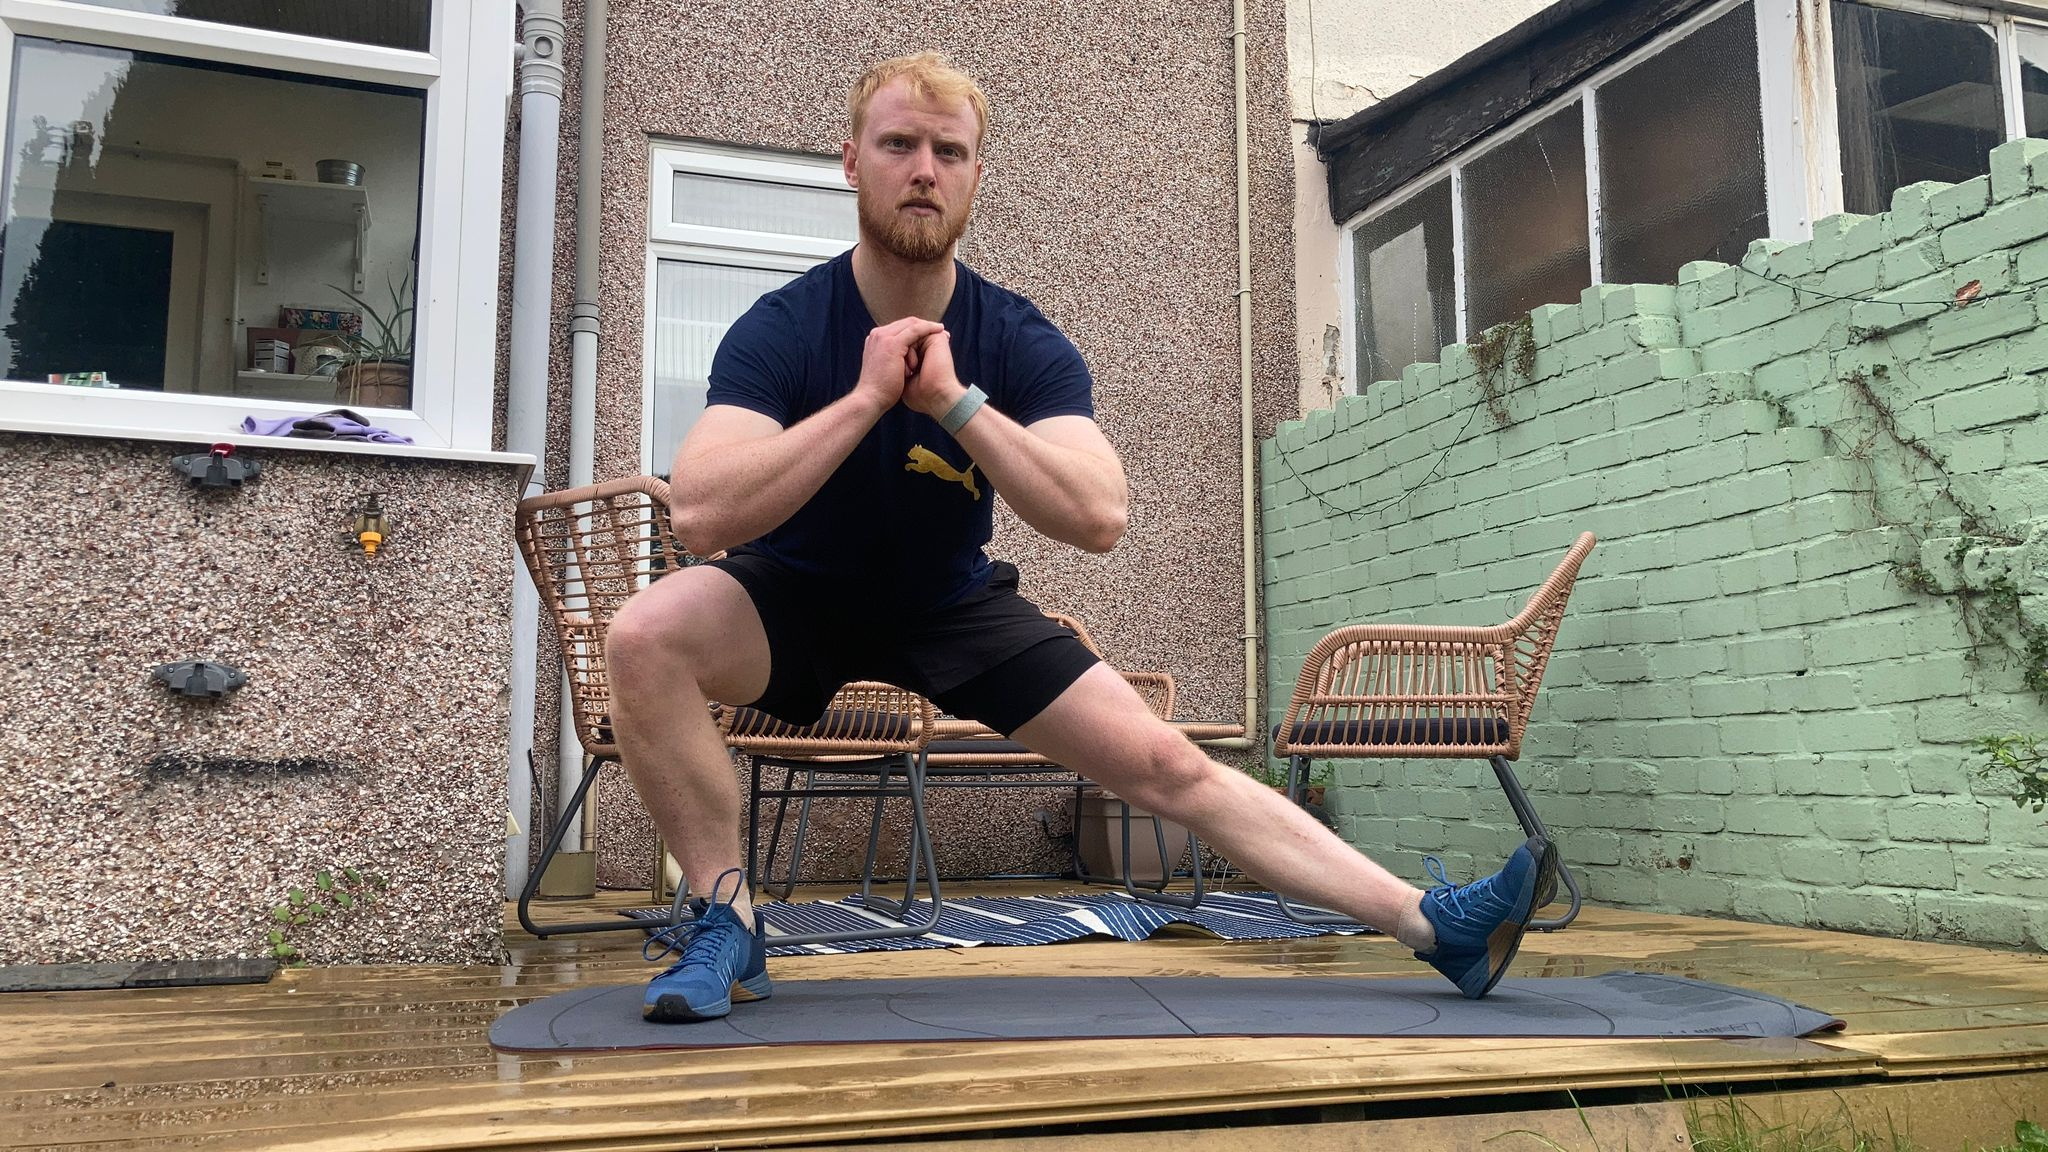 I did 20 Cossack squats every day for a week—here's what it did to